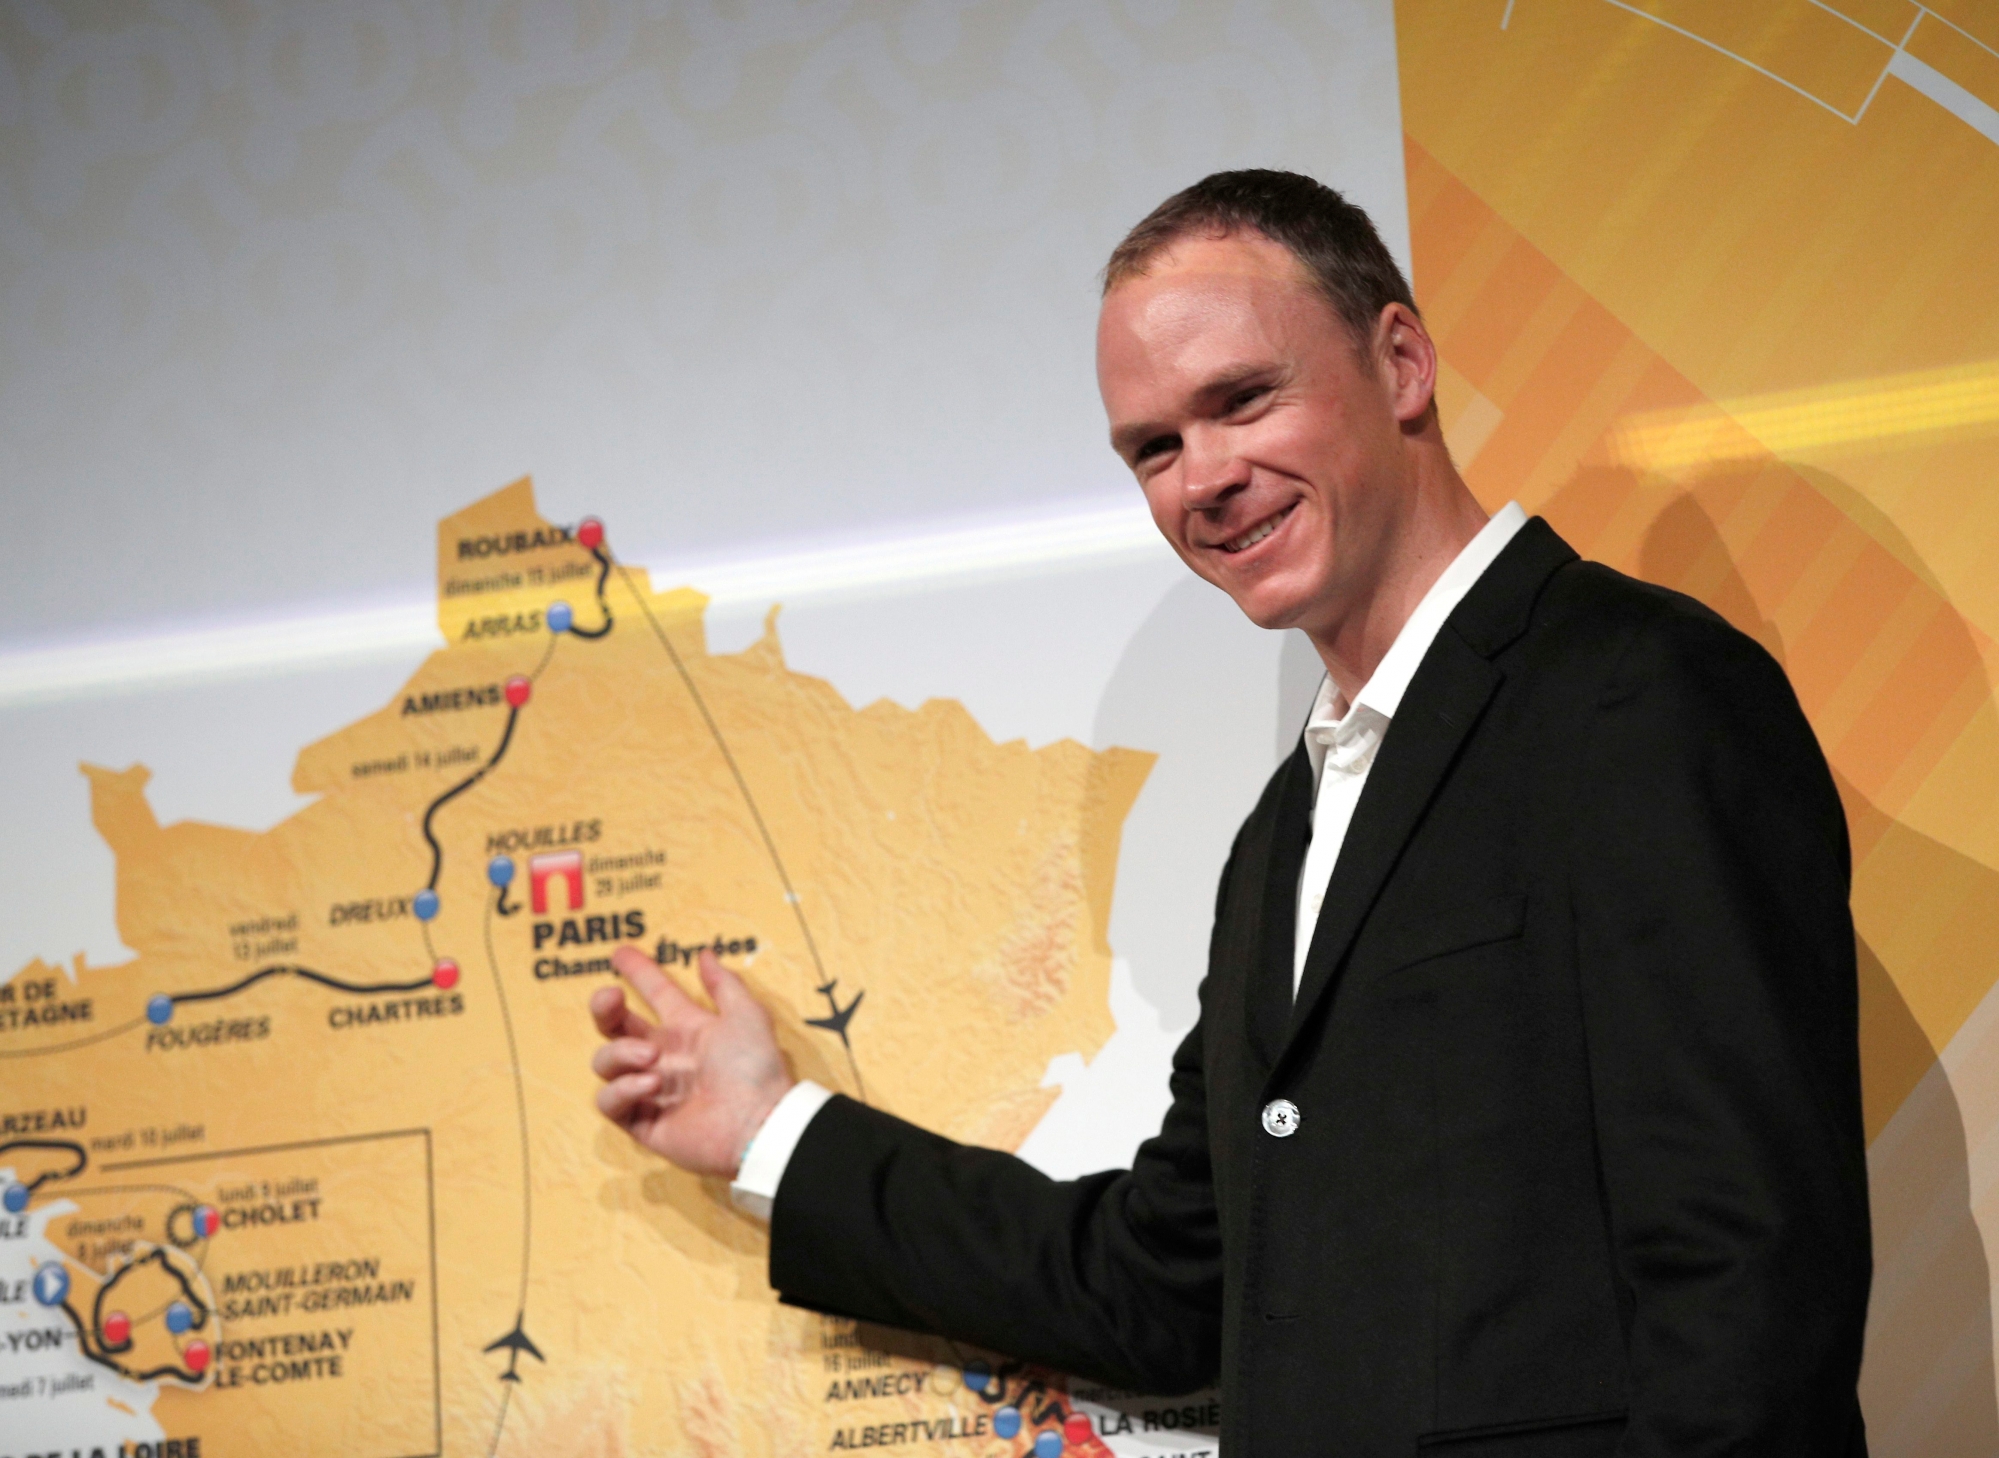 Britain's Chris Froome poses in front of the the road-map during the presentation of the 2018 Tour de France cycling race, in Paris, Tuesday Oct. 17, 2017. The 105th edition of the race starts on July 7 2018 to end on the Champs-Elysees avenue on July 29. (AP Photo/Christophe Ena) France Cycling Tour de France